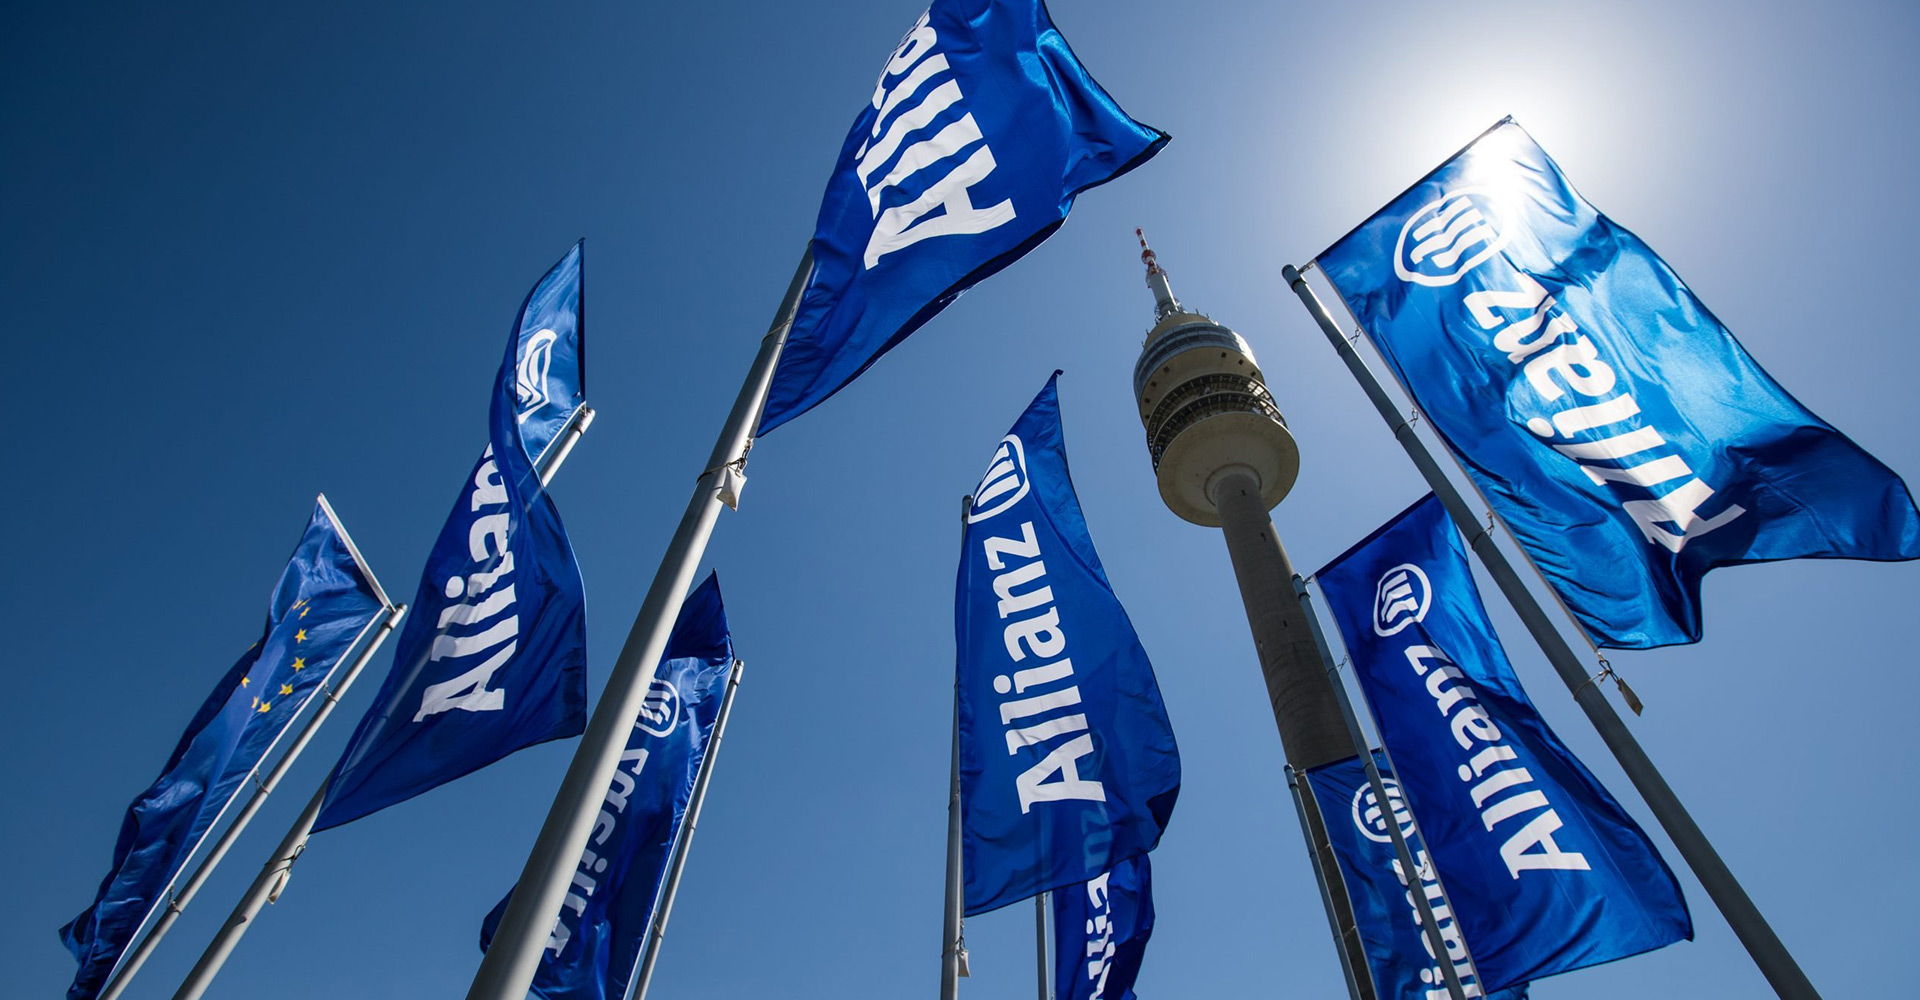 Allianz Global Investors | Our history